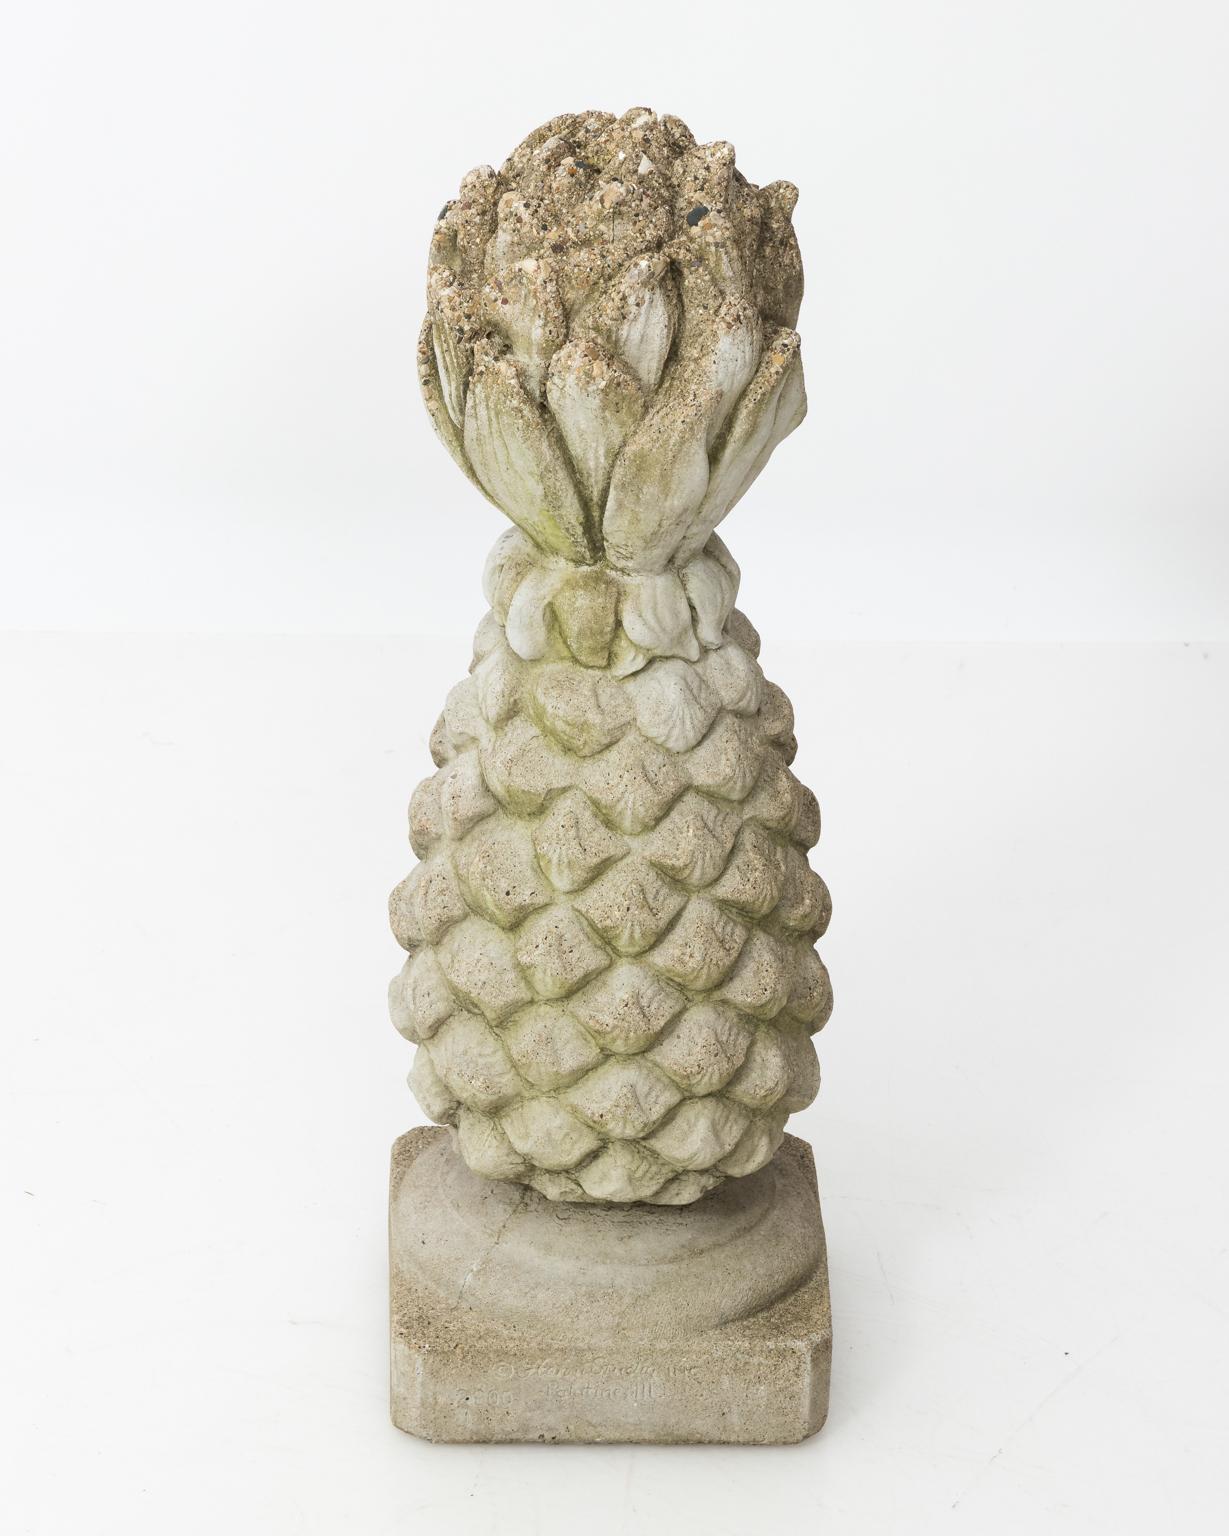 Decorative stone pineapple for the Garden, circa 1980s. Please note of the weathered finish due to exposure to the elements.